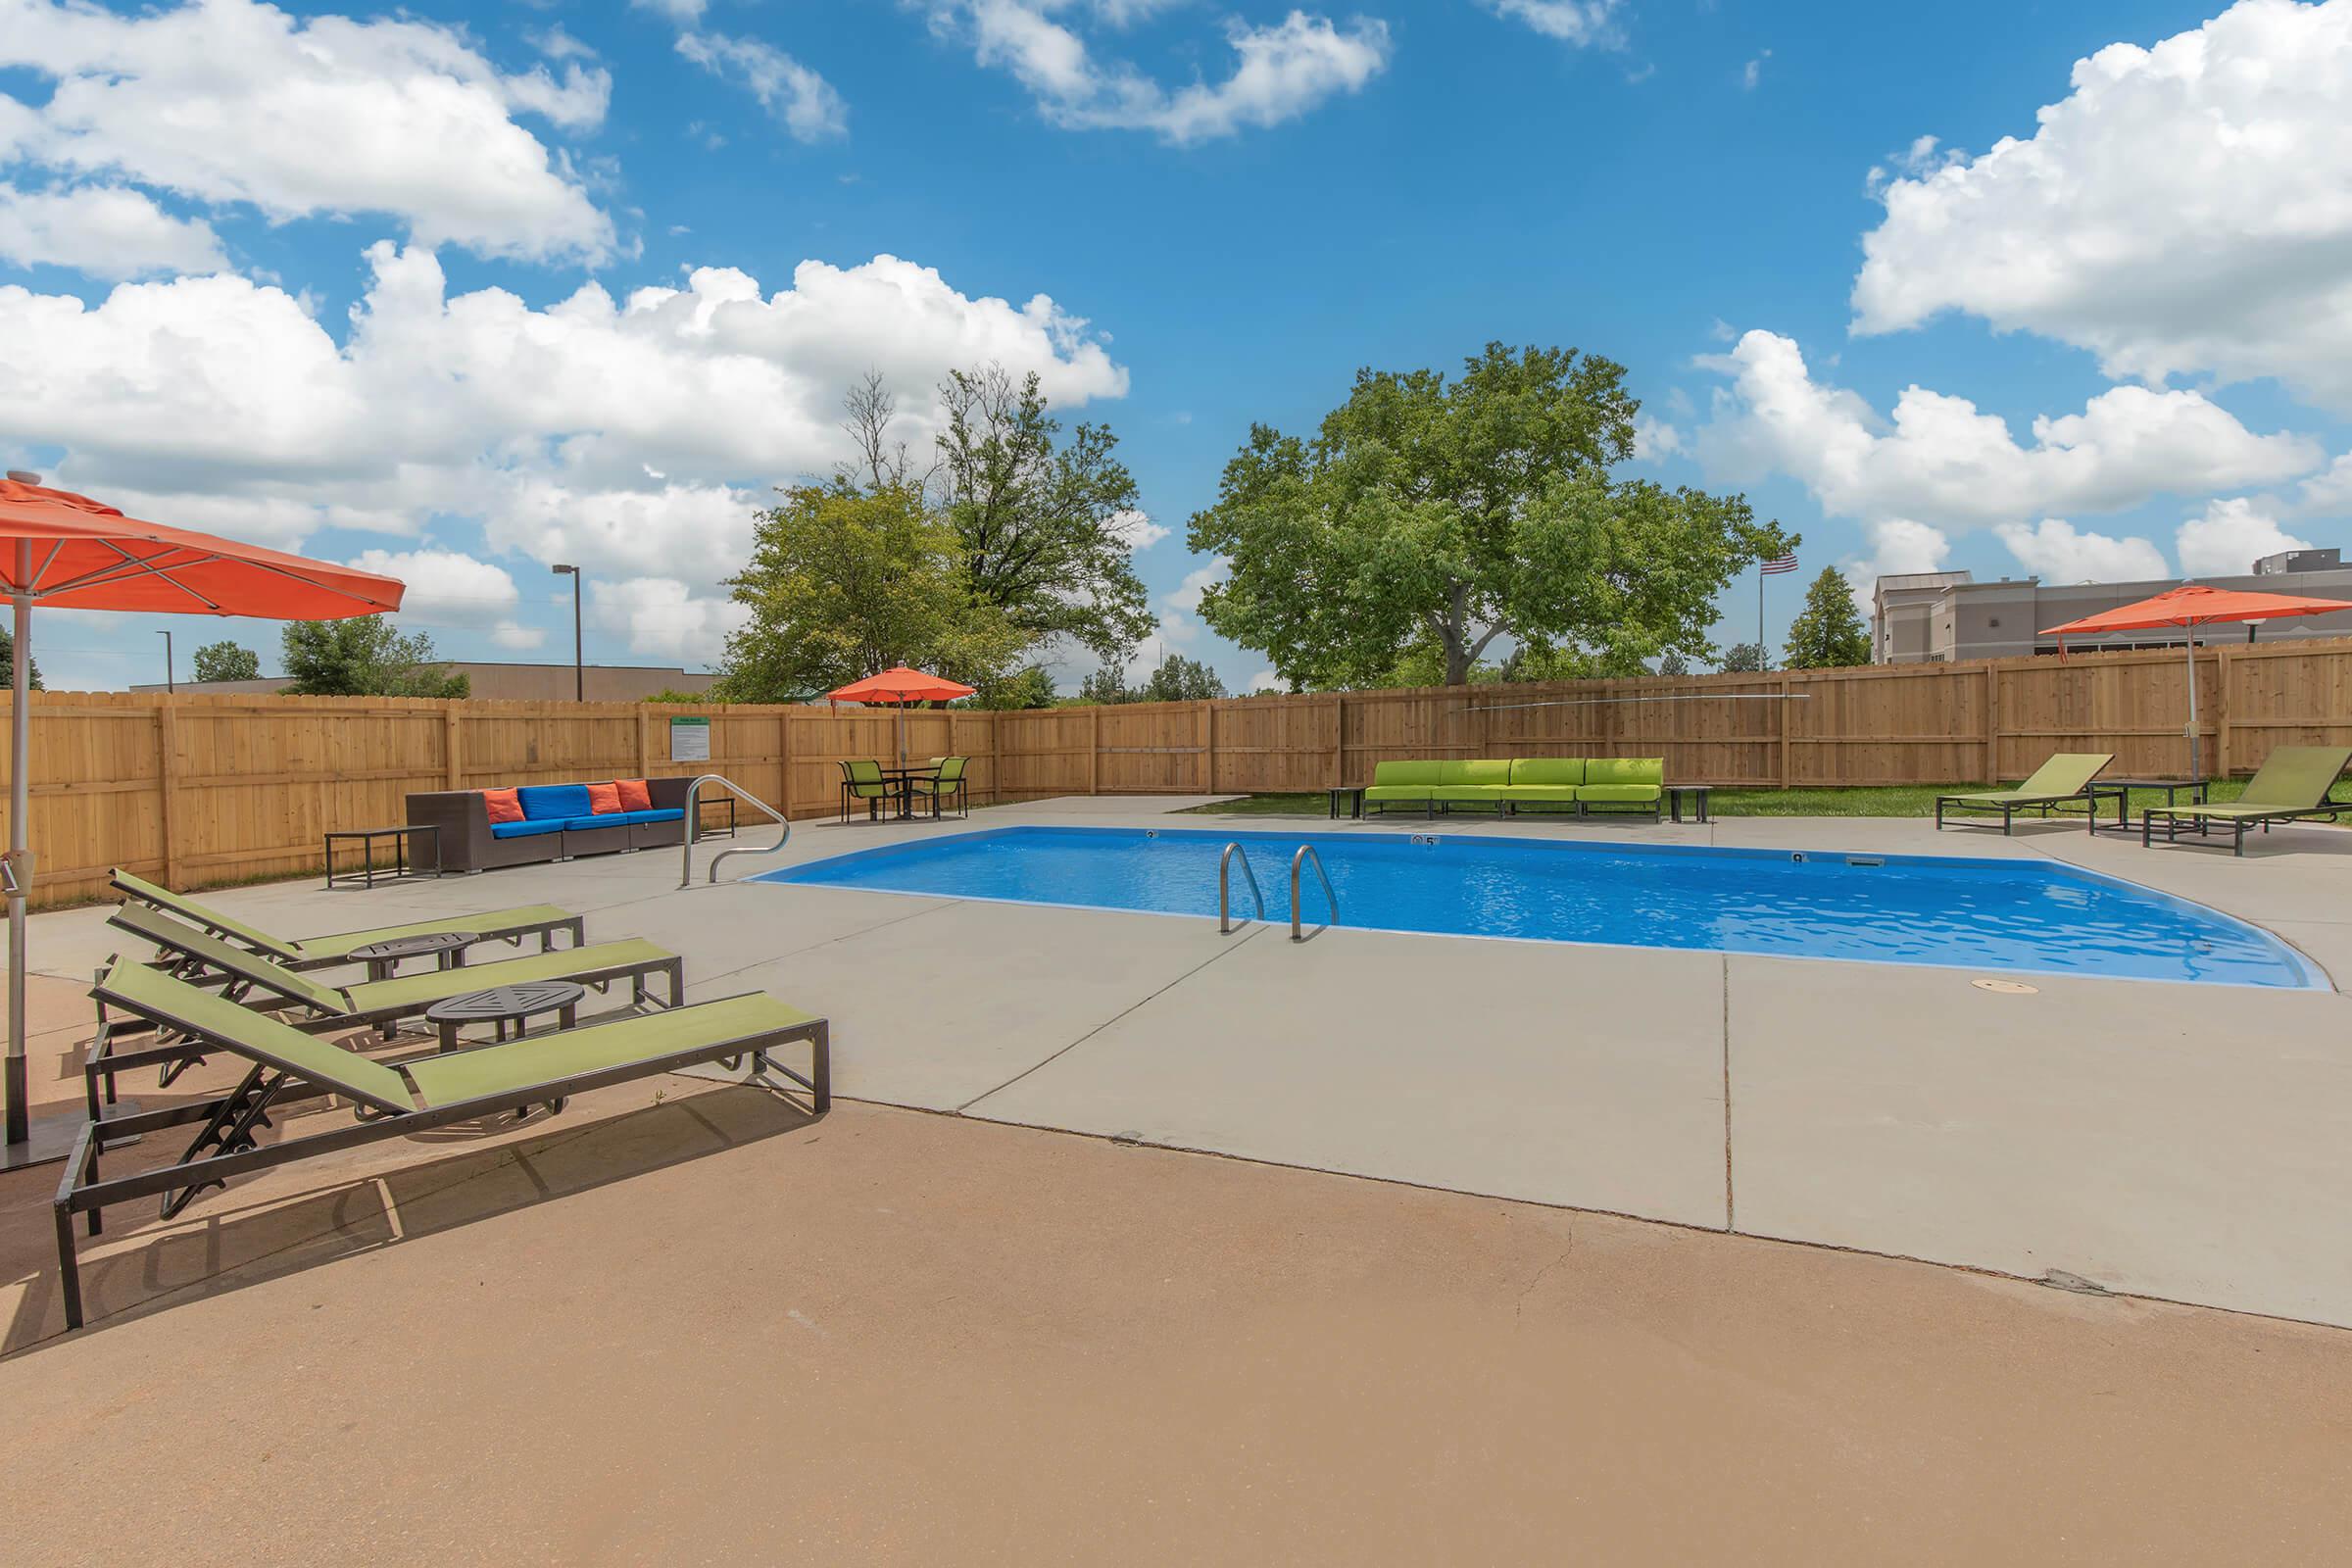 Swimming pool with lounge chairs and umbrellas at The Oslo, located in Northglenn, CO